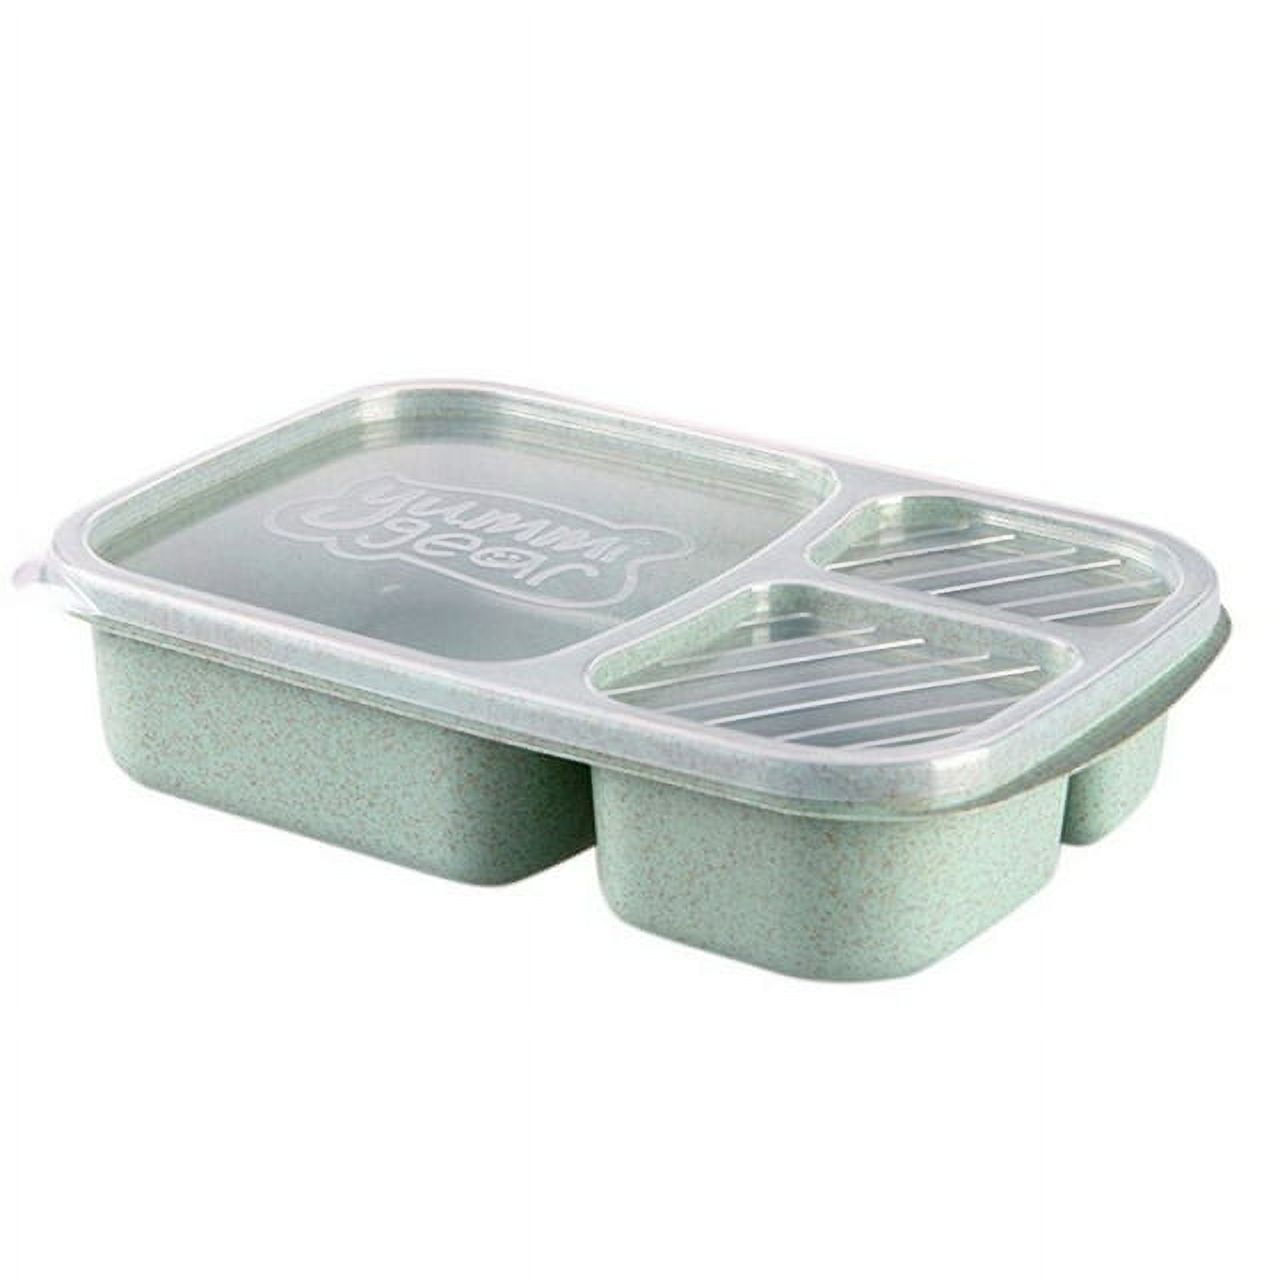 Mini Plastic Food Storage Containers With Lids Small Airtight Containers  Round School Lunch Box For Children Leftover Food Box - AliExpress